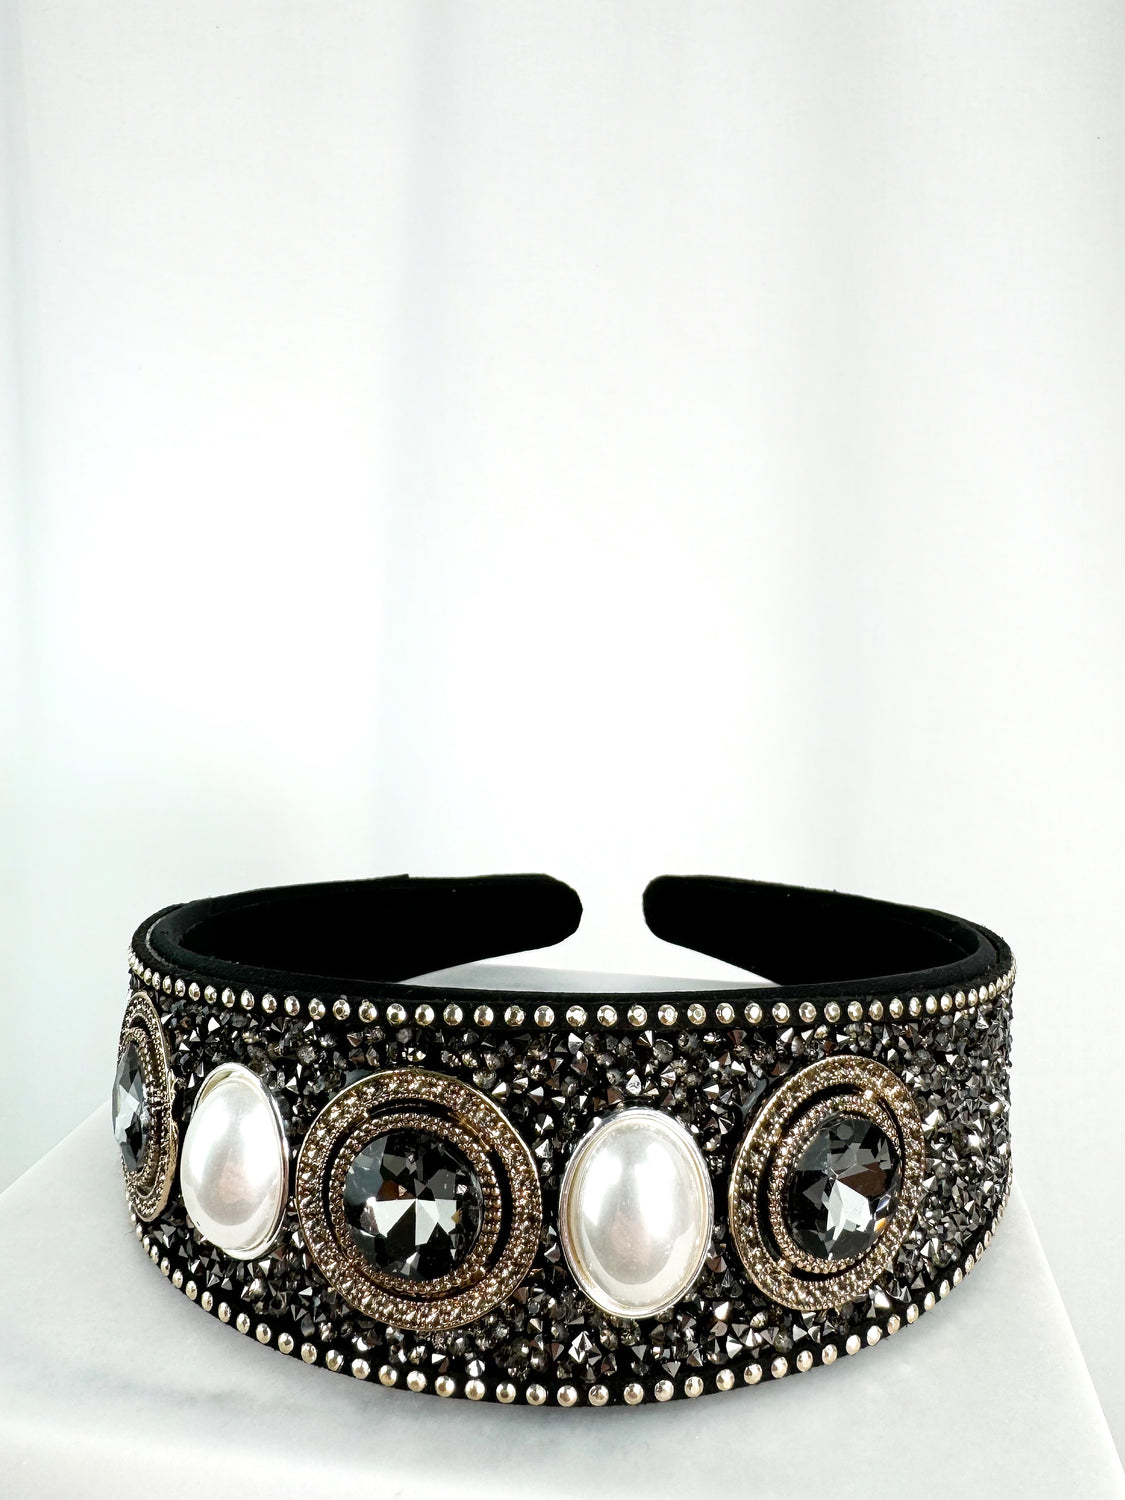 Black Large Headband with Black Stones and Pearls